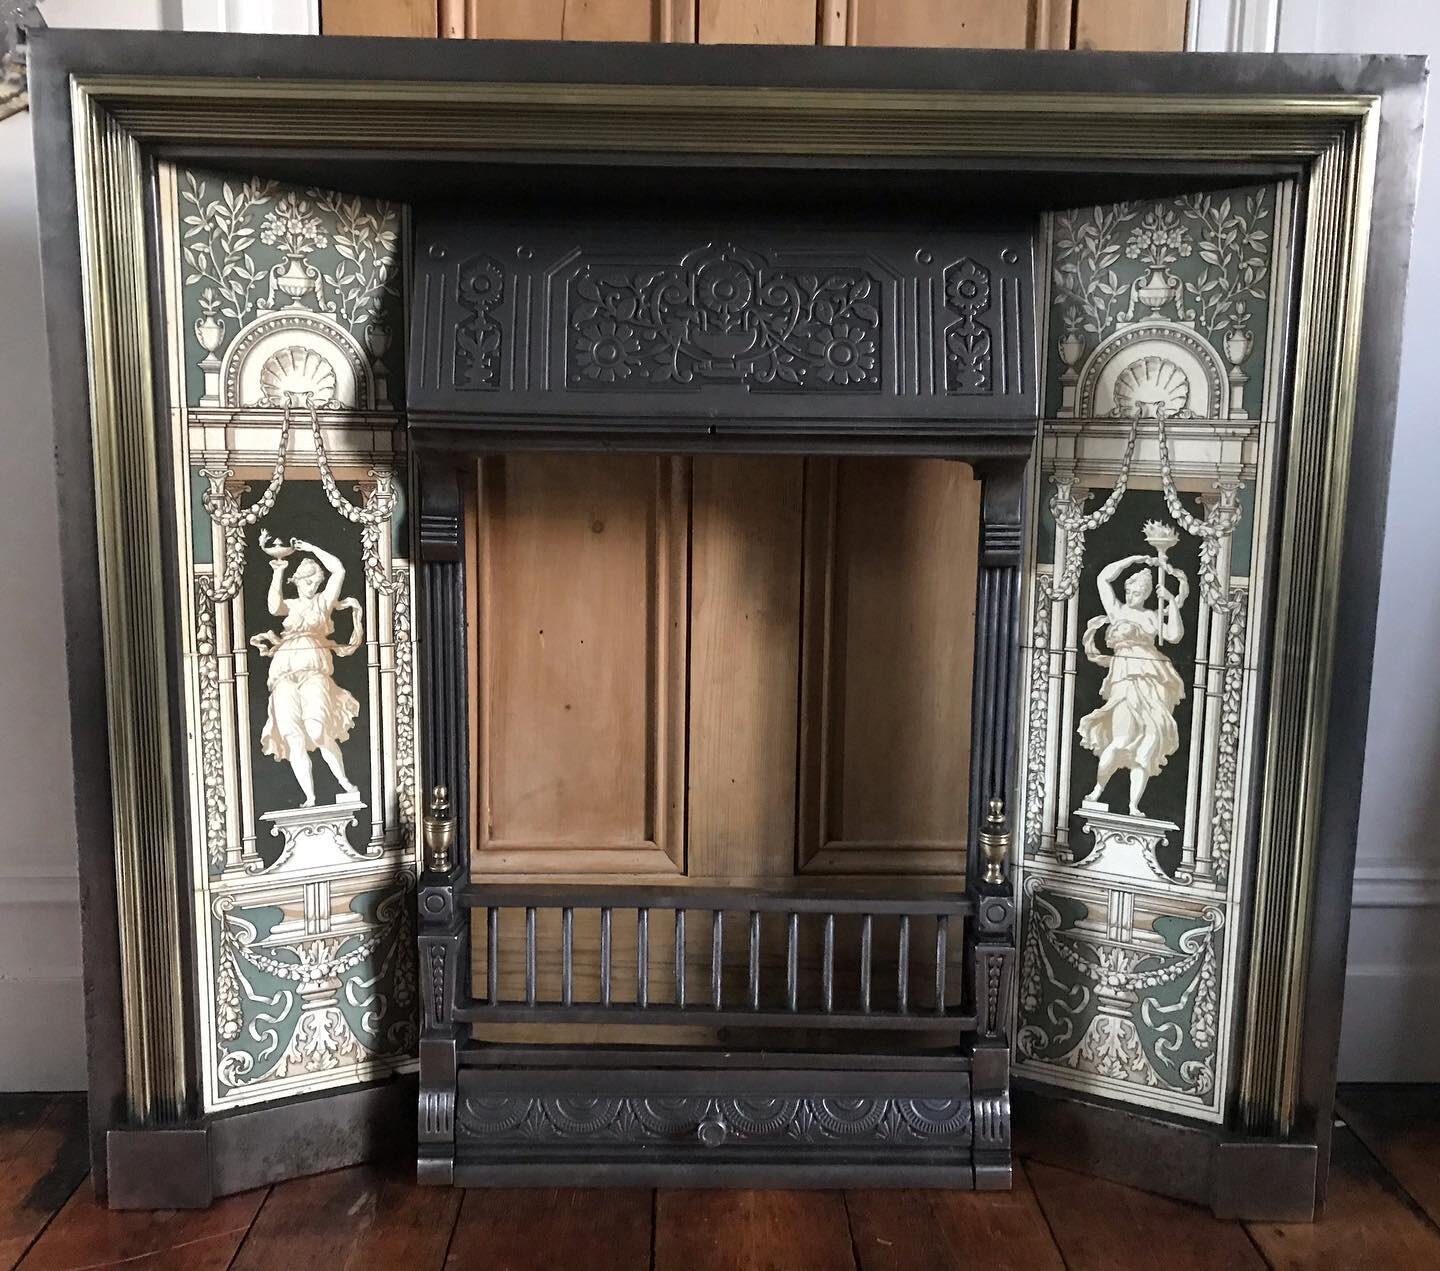 My favourite Victorian cast iron insert just back from being refurbished. Beautiful original tiles with a rare brass border
#antiques #interiordesign #interiors #interiordecor #antiquedealer #london #anitquegardenfurniture #architecturalantiques #arc